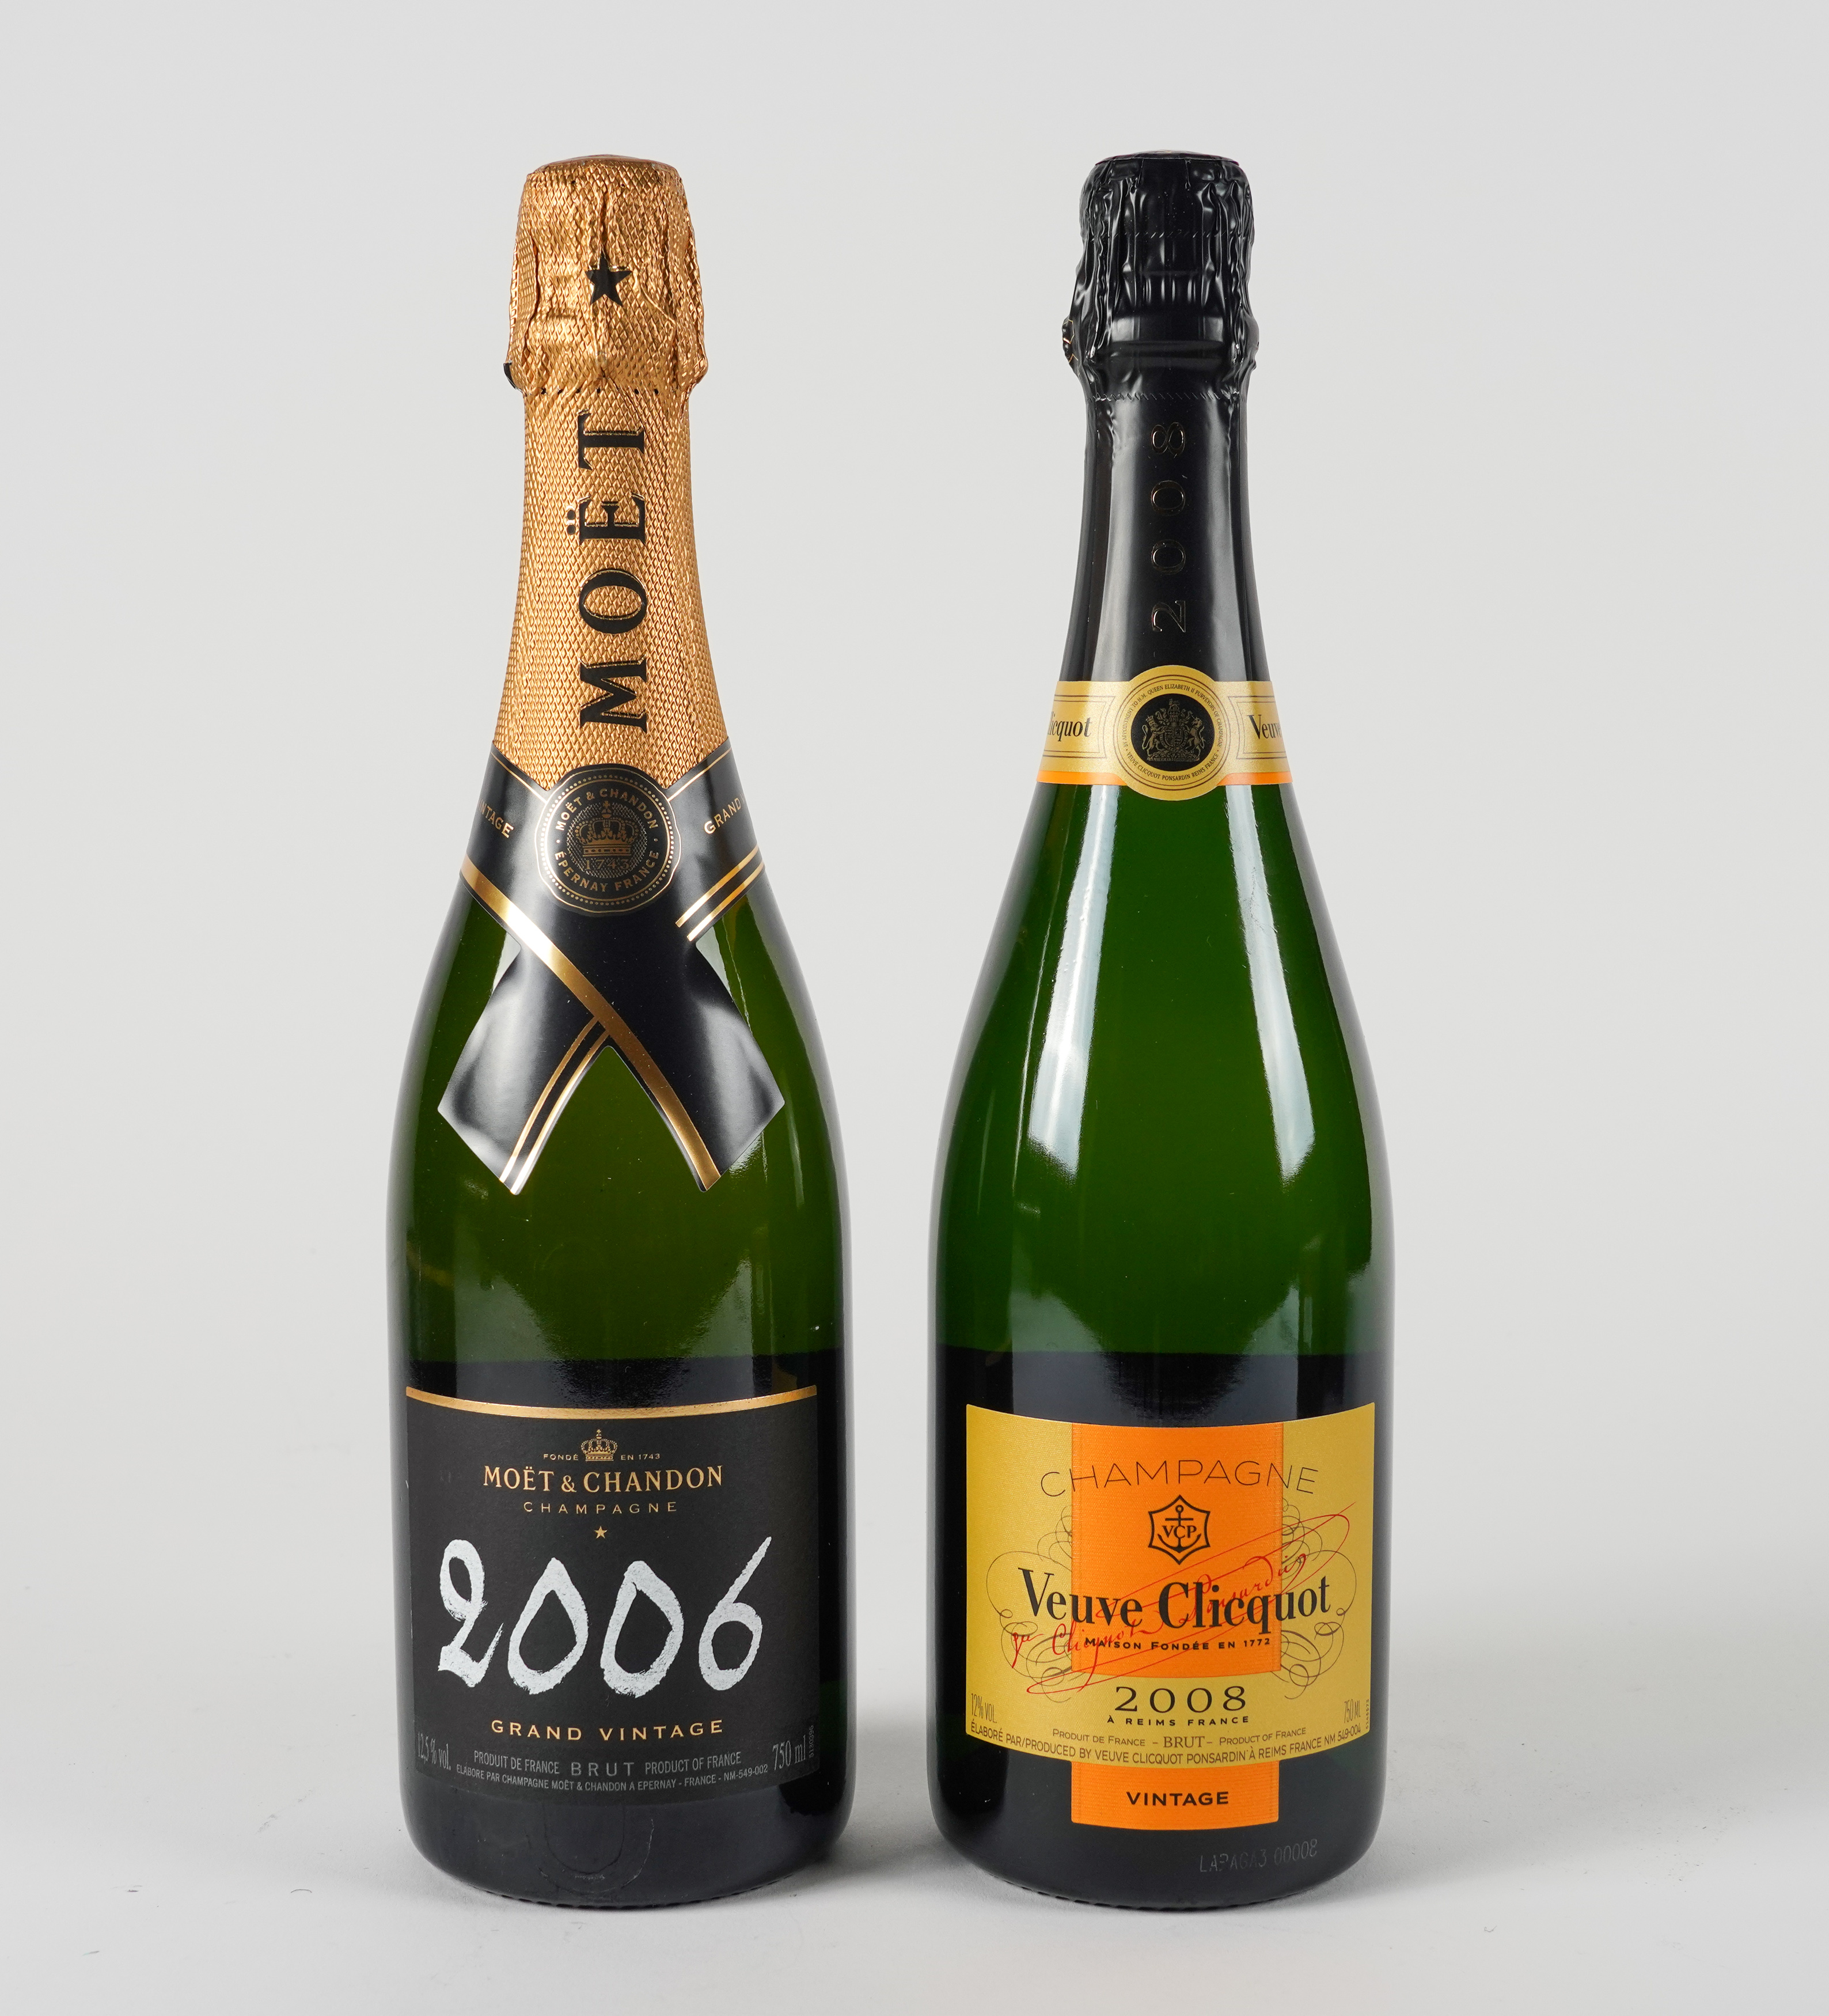 A BOTTLE OF VEUVE CLICQUOT CHAMPAGNE 2008 AND A BOTTLE OF MOET CHANDON 2006 (2) - Image 2 of 5